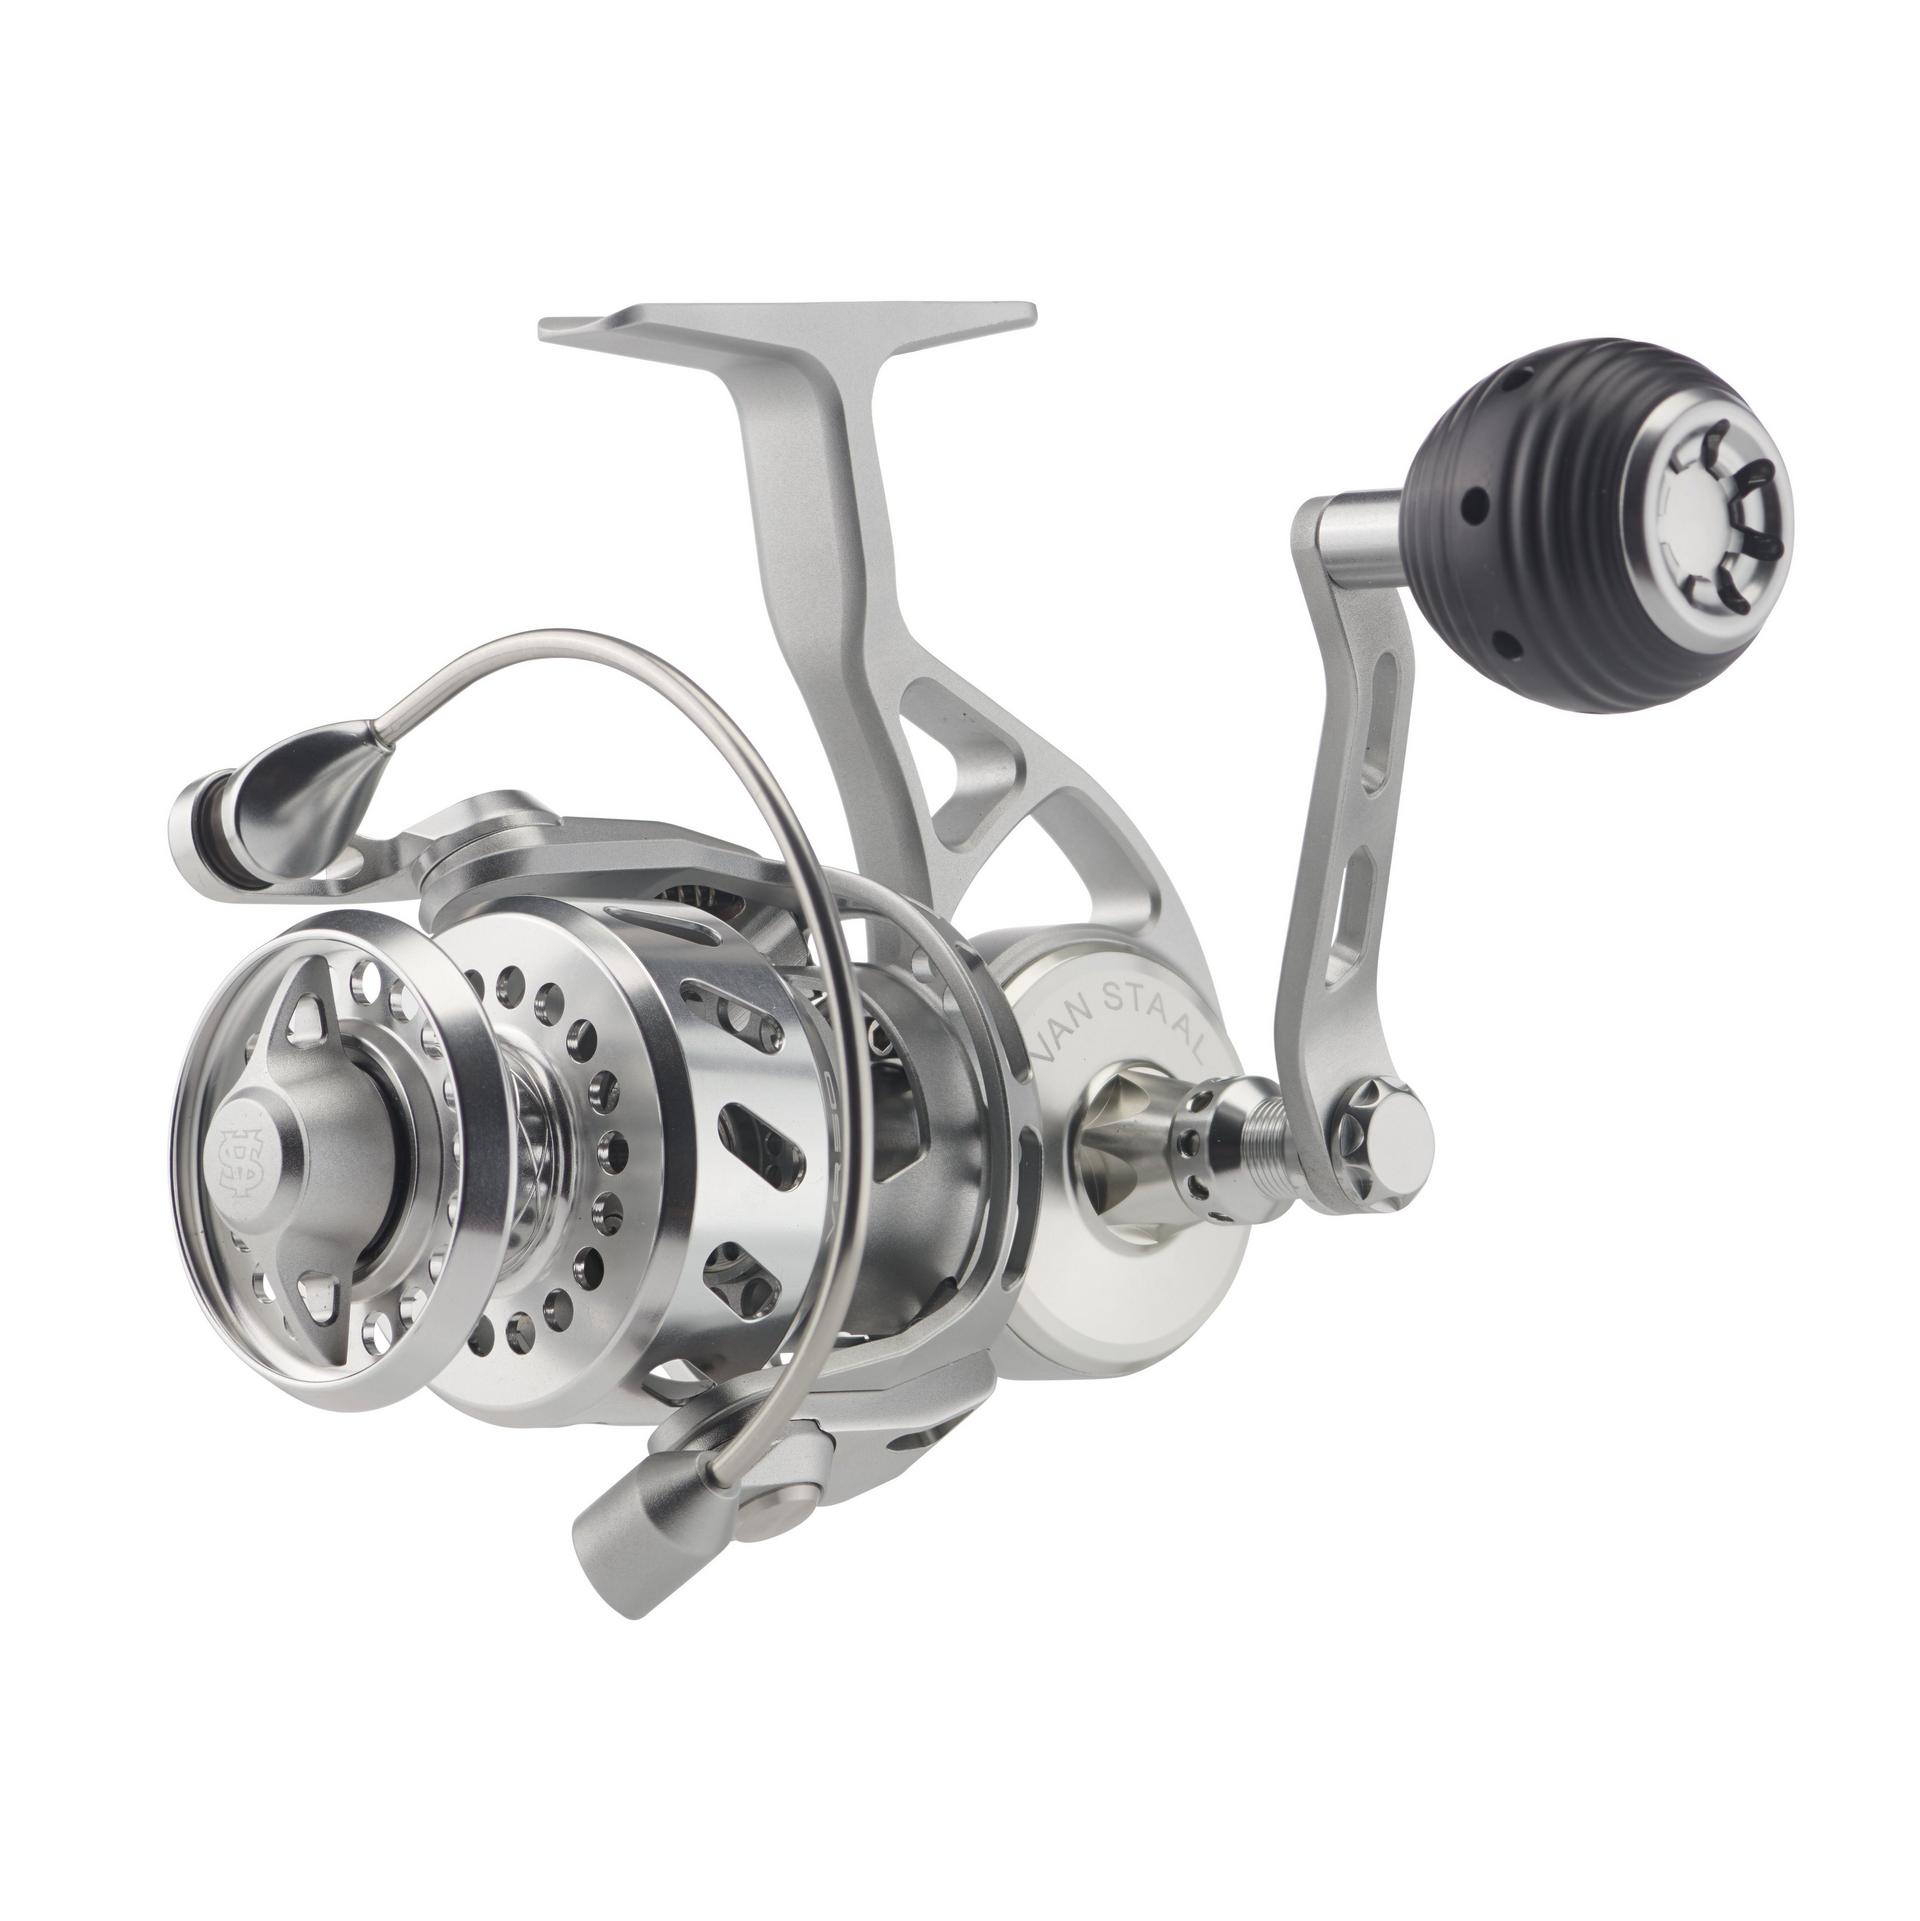 Van Staal VSB-X2 Spin 50 - Silver from VAN STAAL - CHAOS Fishing